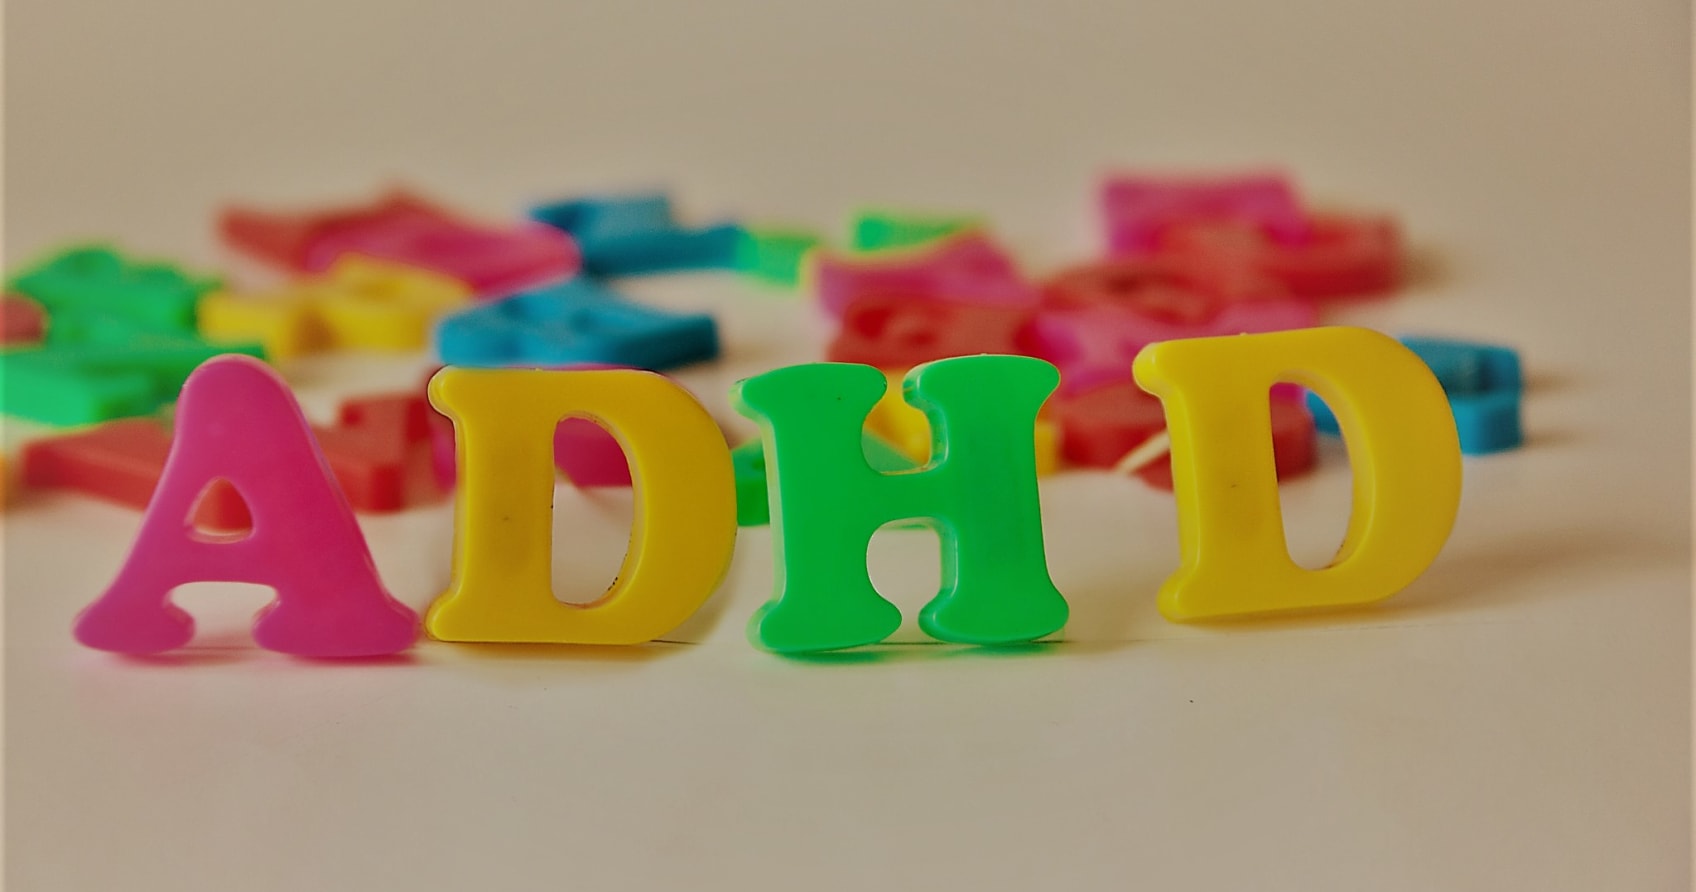 Attention Deficit Hyperactivity Disorder Adhd Condition Stock Illustration  2337948159  Shutterstock